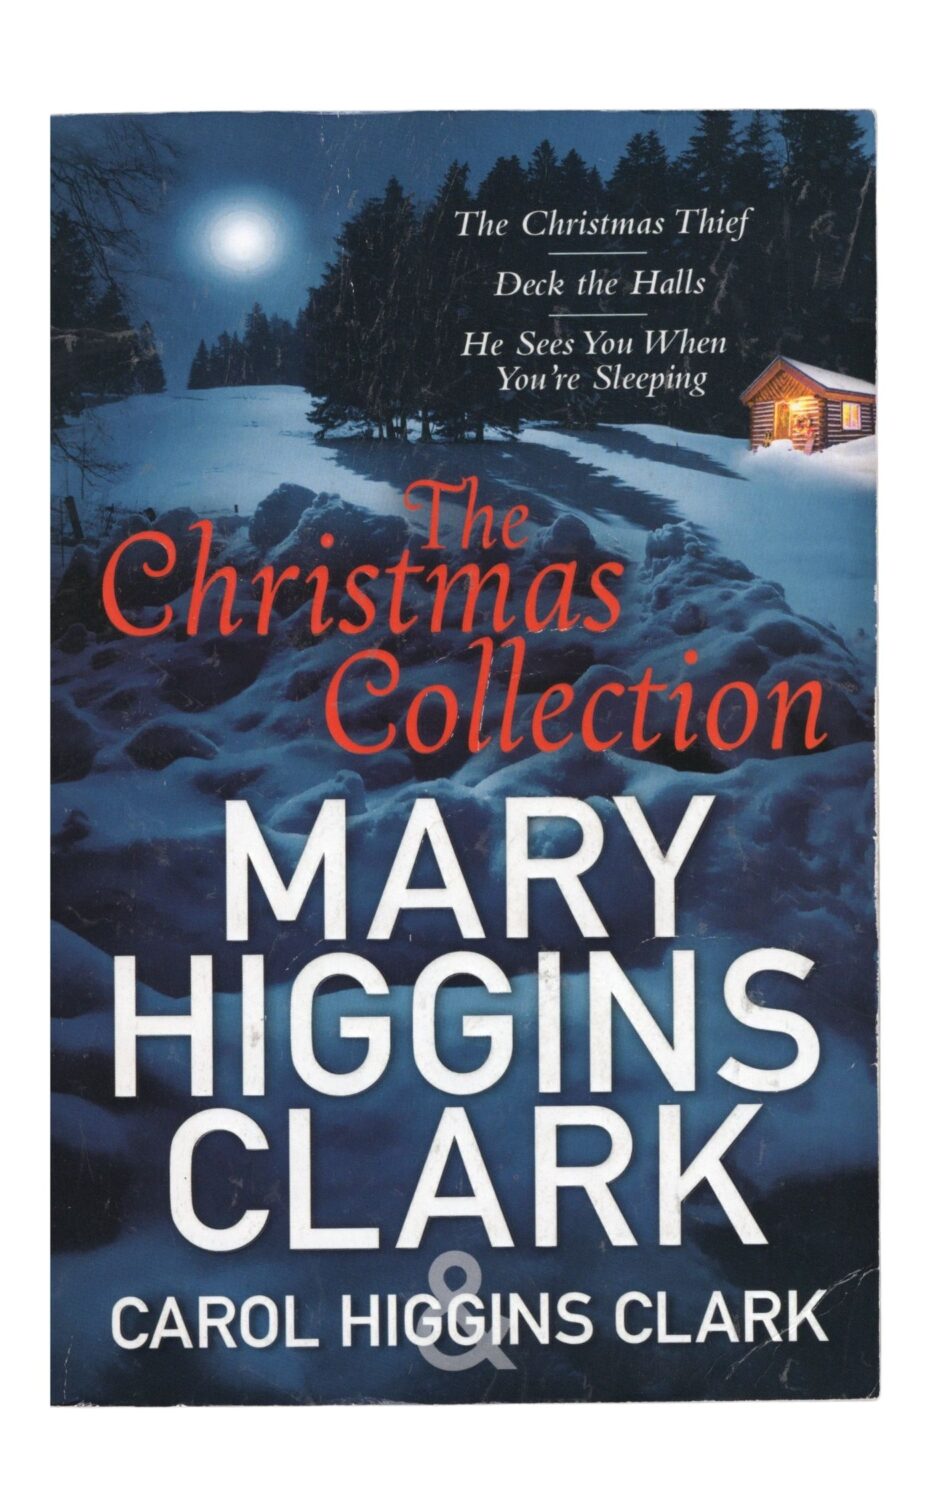 Mary Higgins Clark and Carol Higgins Clark - The Christmas Collection